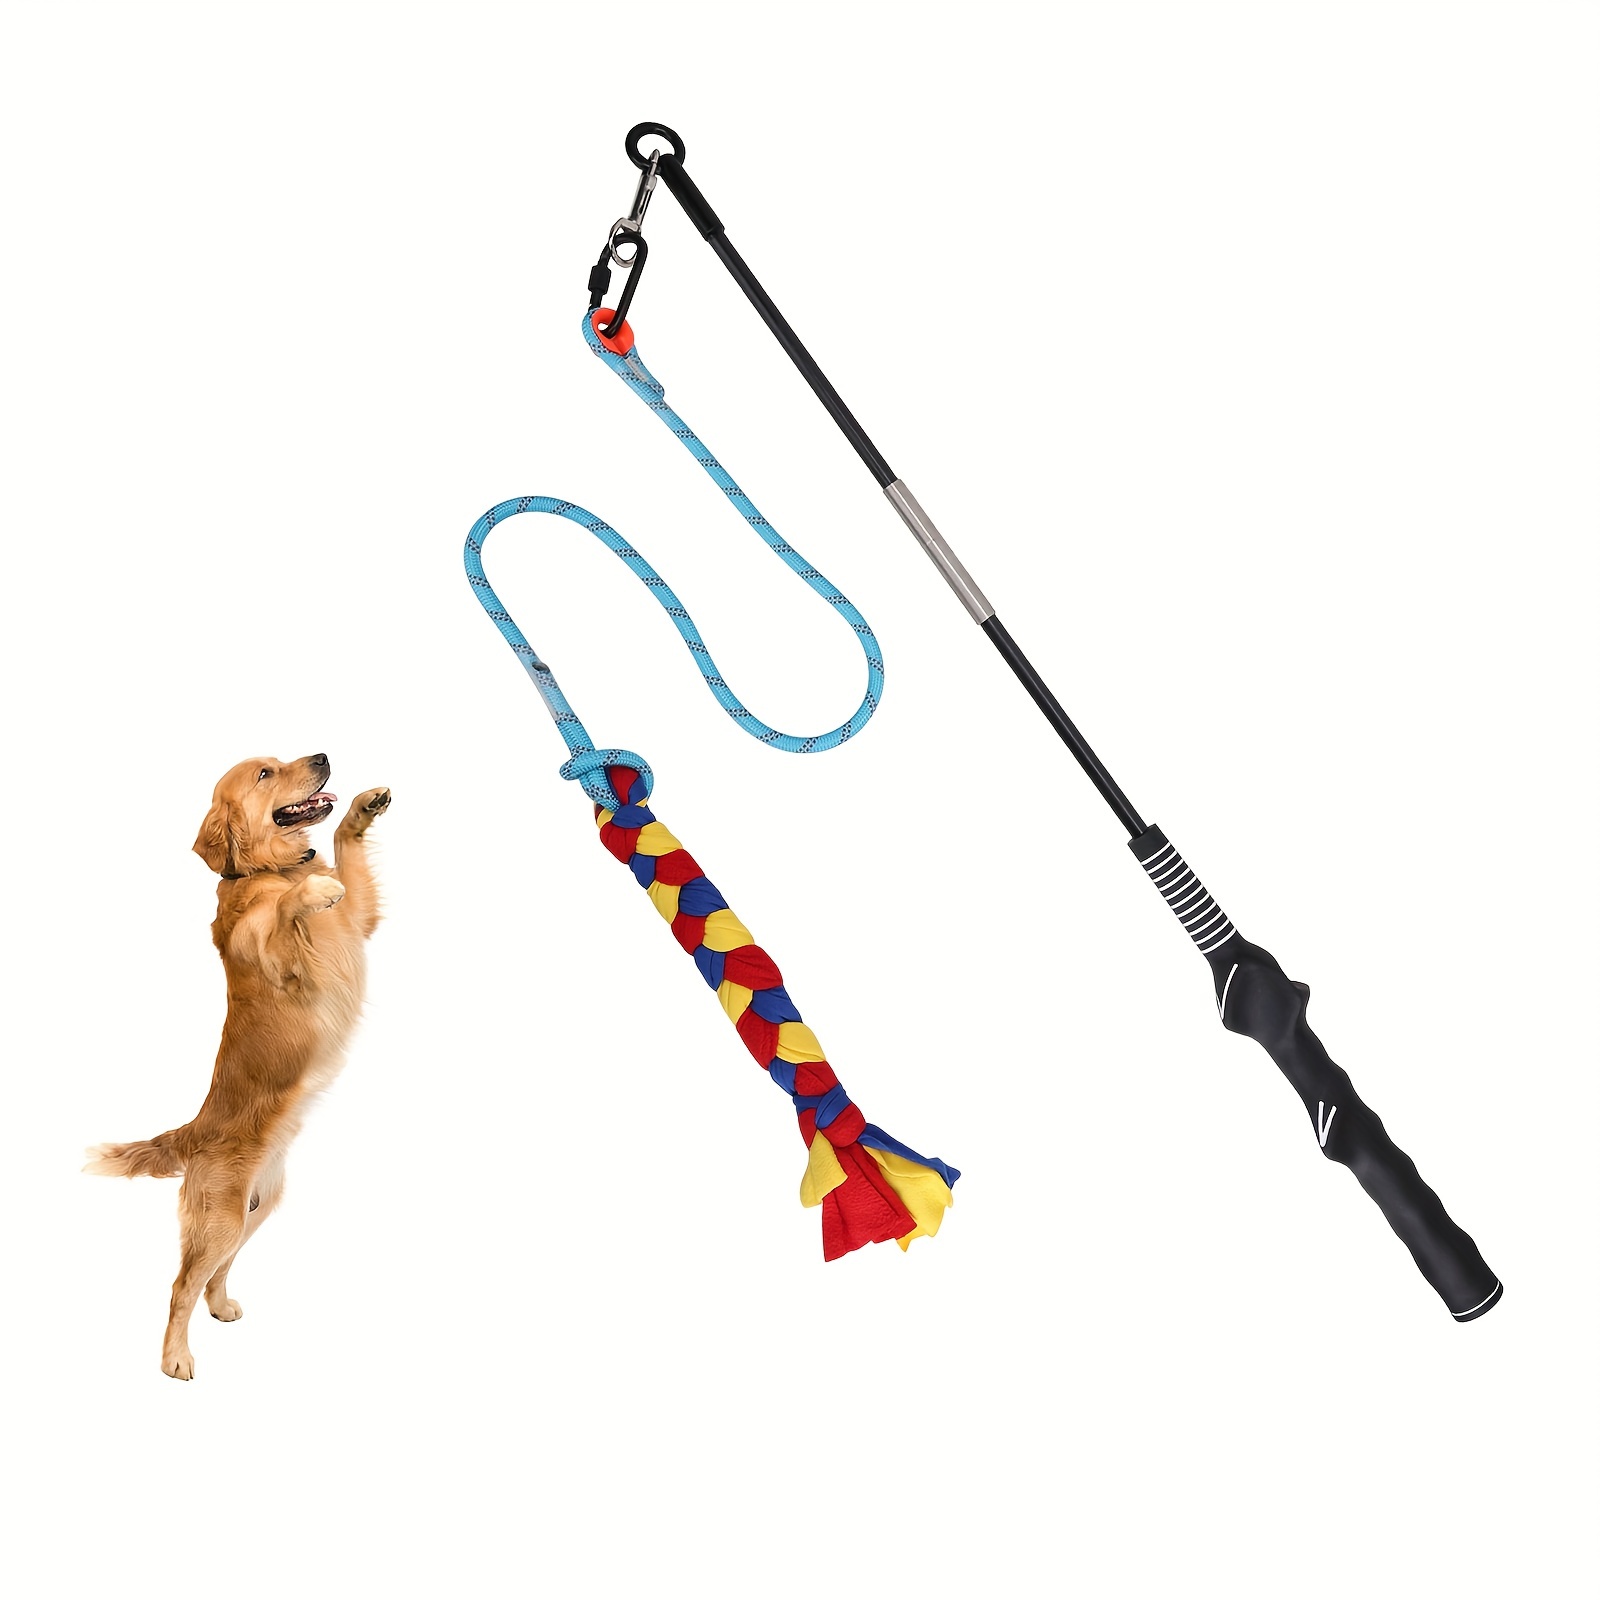 Interactive Dog Toys Dog Flirt Pole Toy Dog * And Tug Of War Toy Dog Teaser  Wand With Lure Chewing Toy For Outdoor Dogs Exercise, Training And Pla